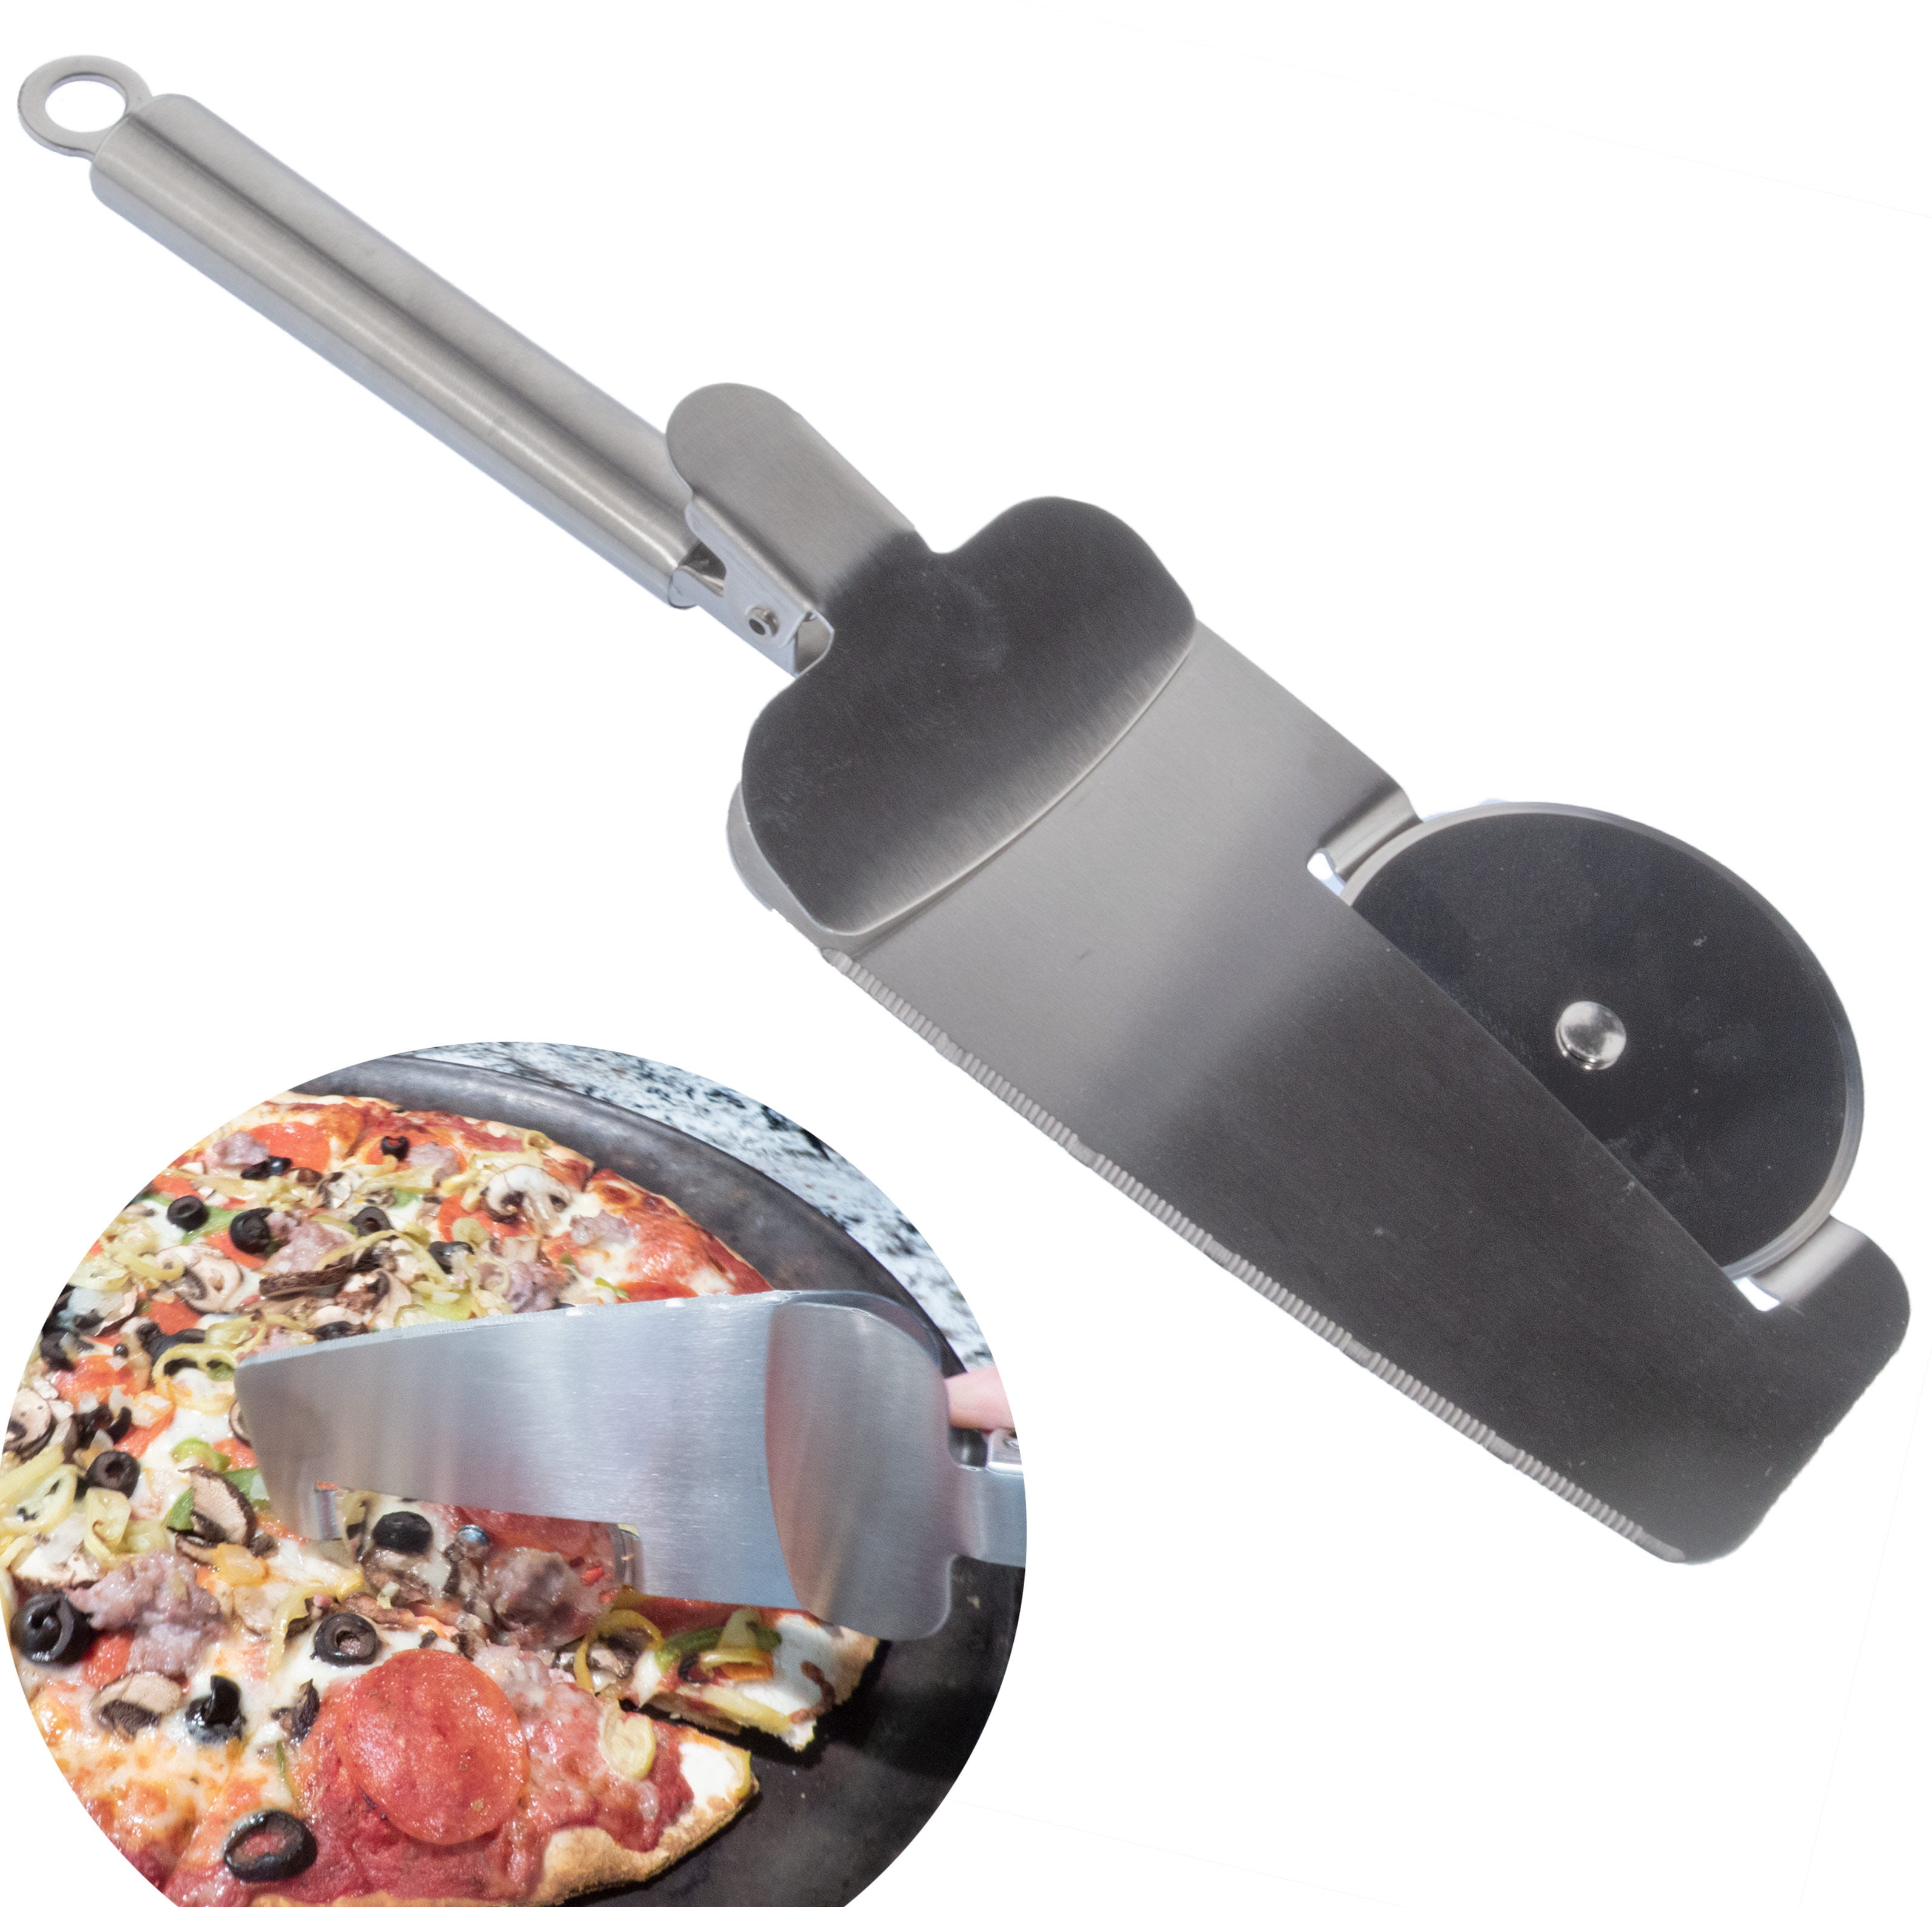  Dreamfarm Scizza, Non-Stick Pizza Scissors with Protective  Server, Stainless Steel, All-In-One Pizza Slicer, Easy-To-Use &  Easy-To-Clean Pizza Cutters